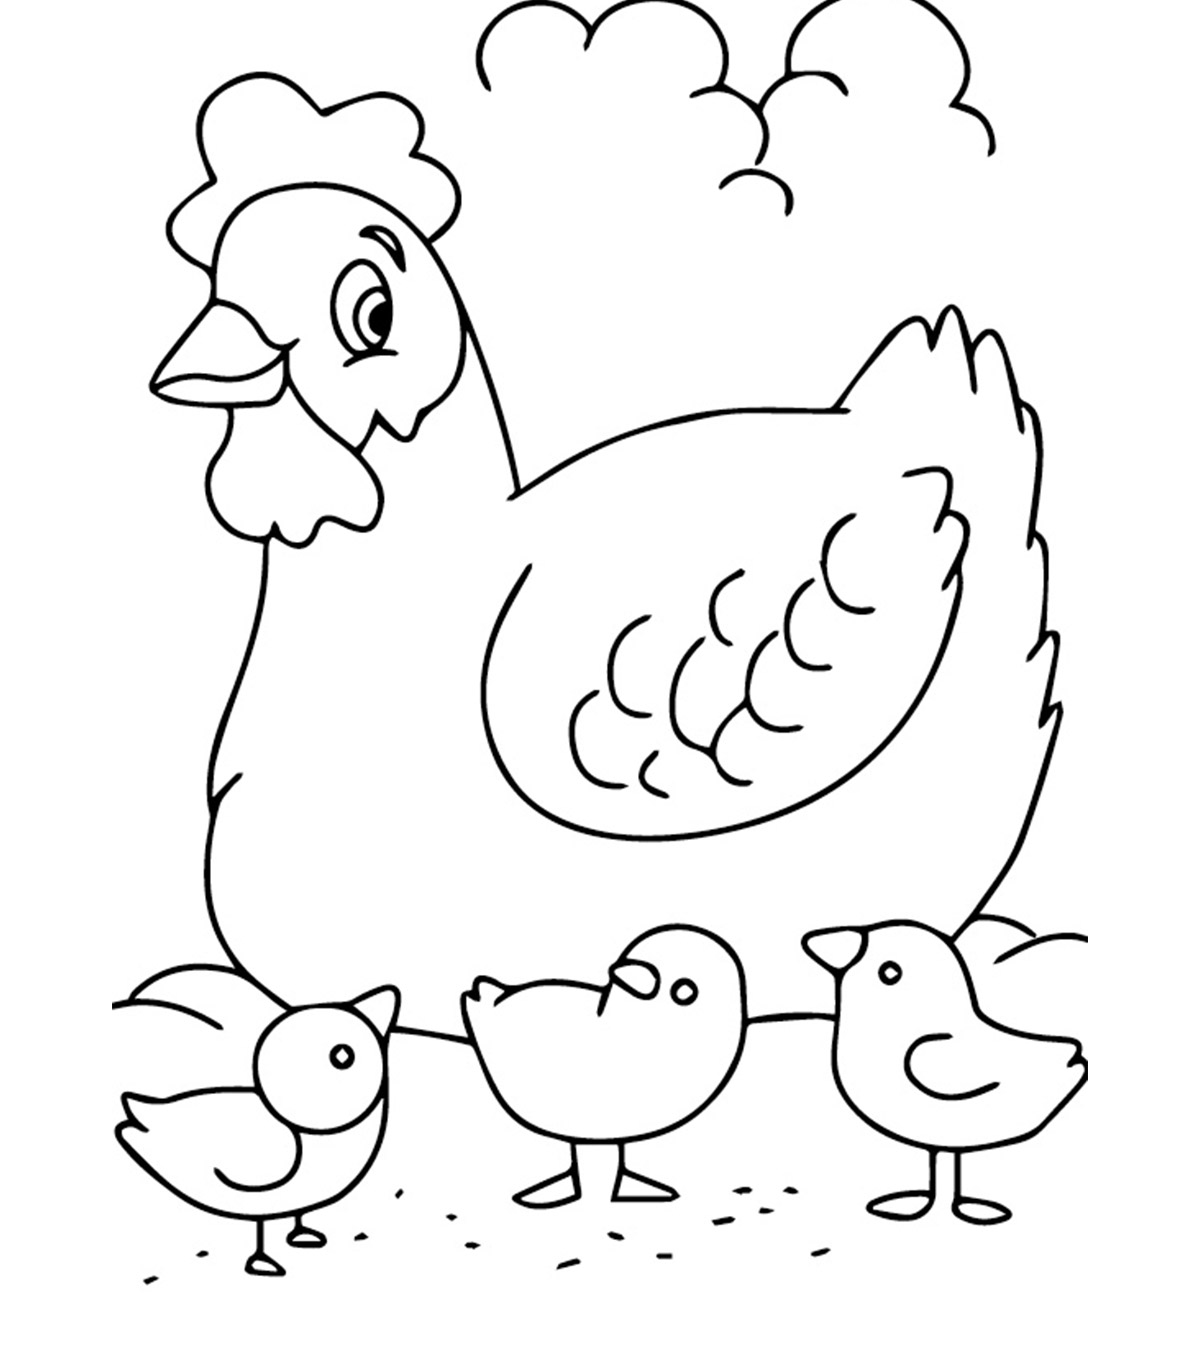 Download Top 10 Free Printable Farm Animals Coloring Pages Online